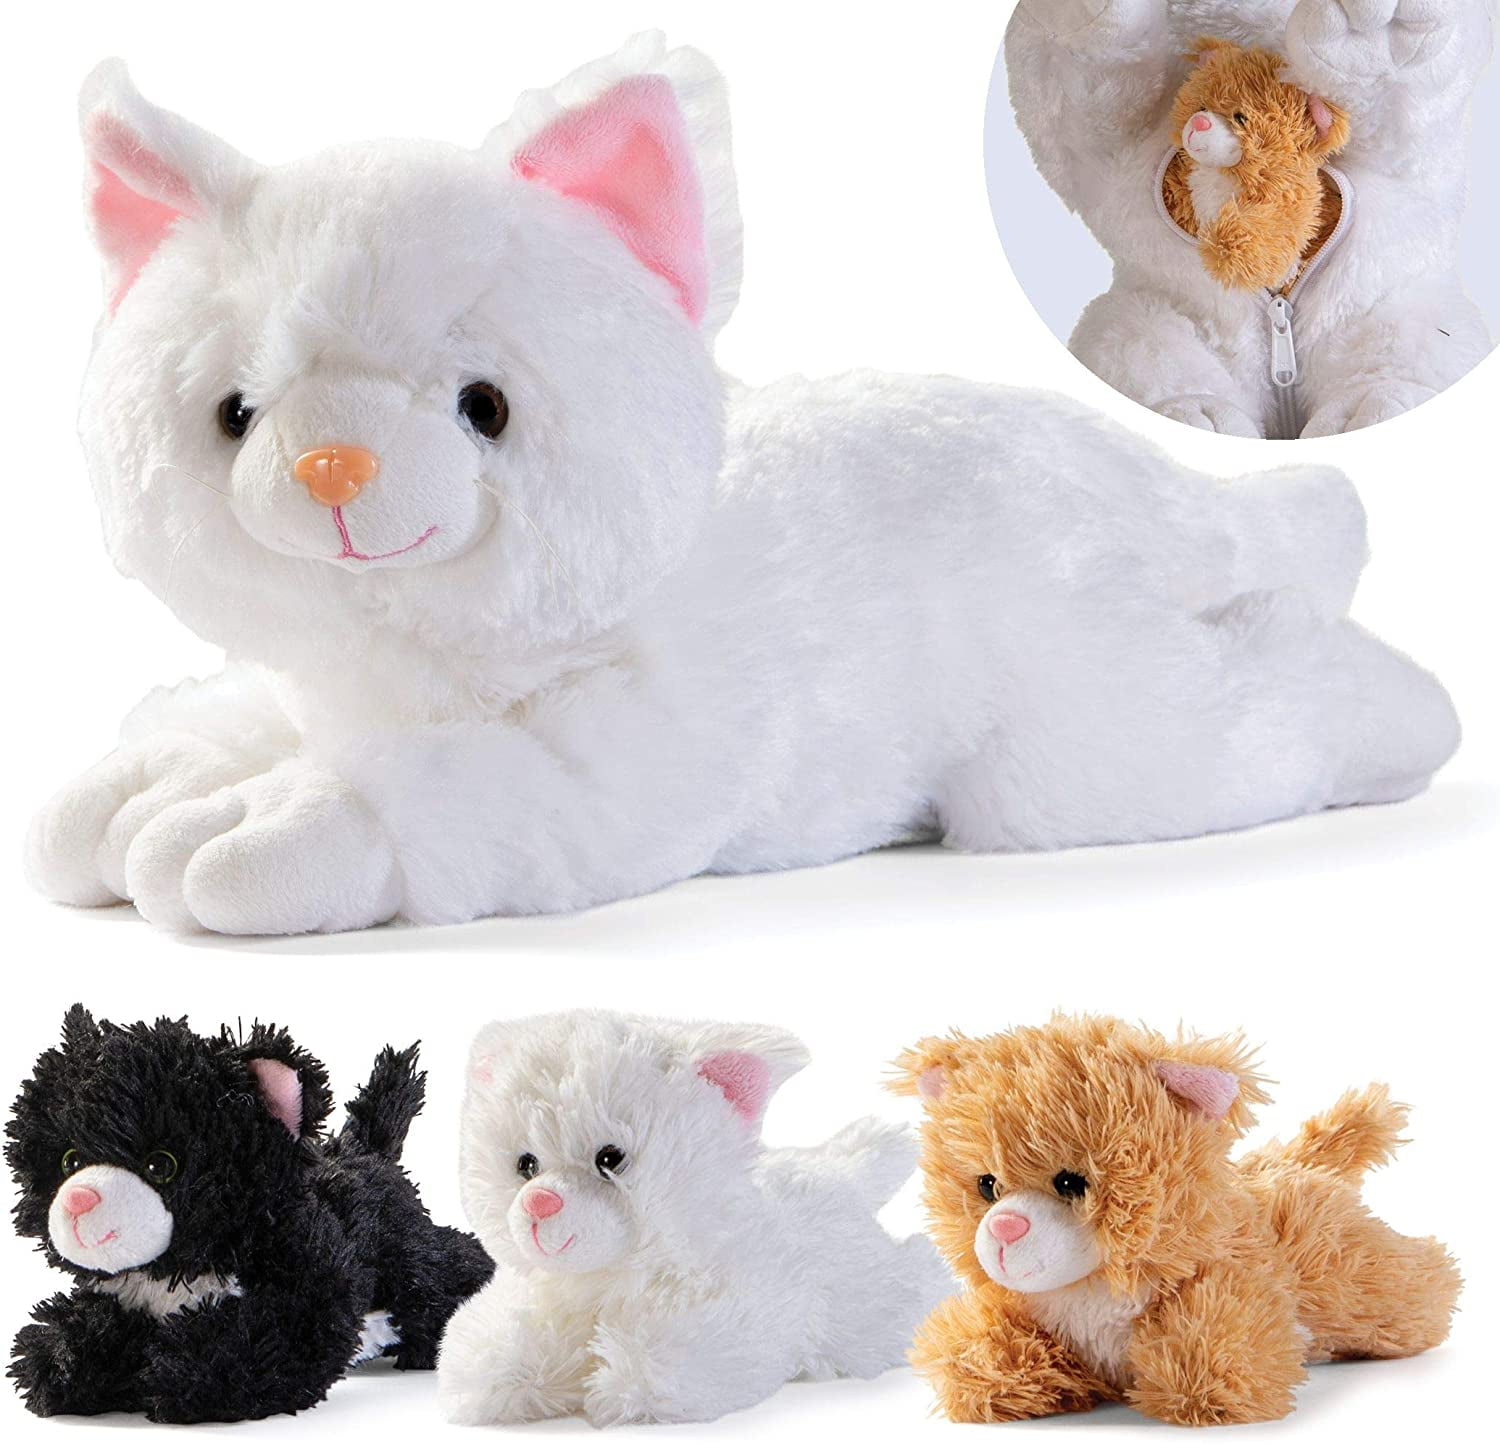 Prextex Soft Plush Cat with Zipper for 3 Cute Little Kittens inside Pouch  Tummy - Plushlings Selection Animals Stuffed 